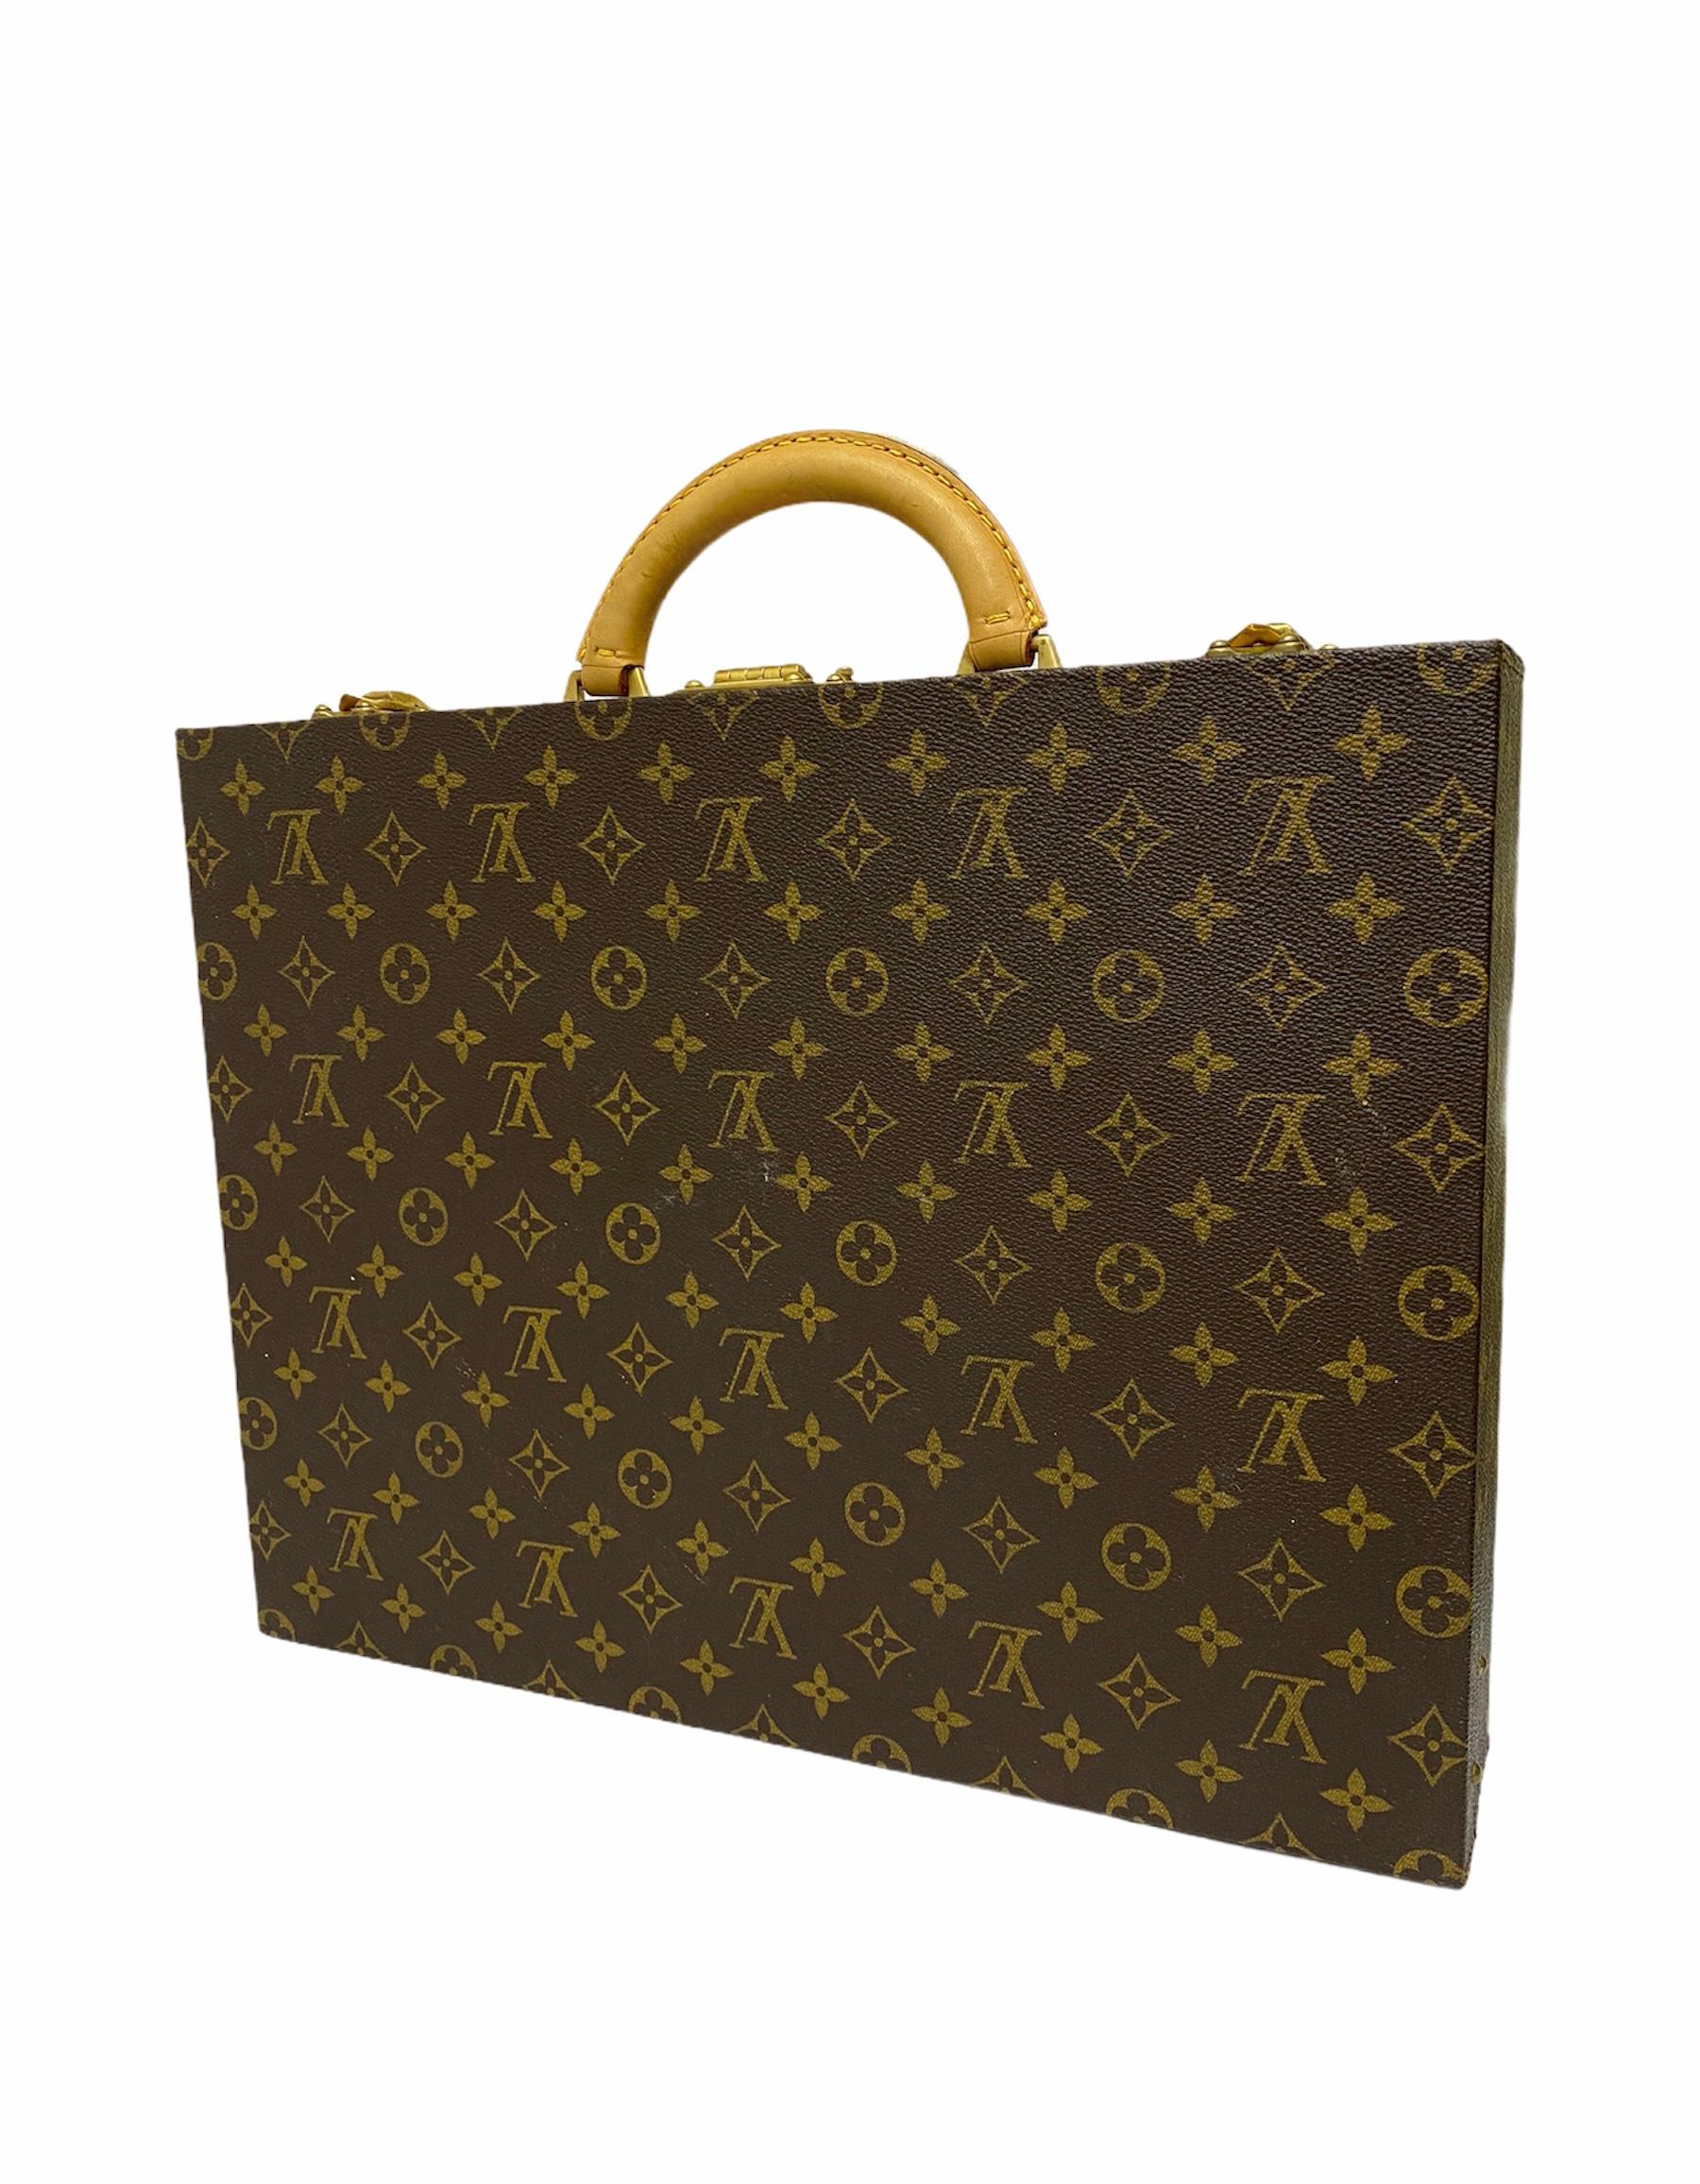 Women's or Men's Louis Vuitton Briefcase with Cowhide Inserts And Golden Hardware